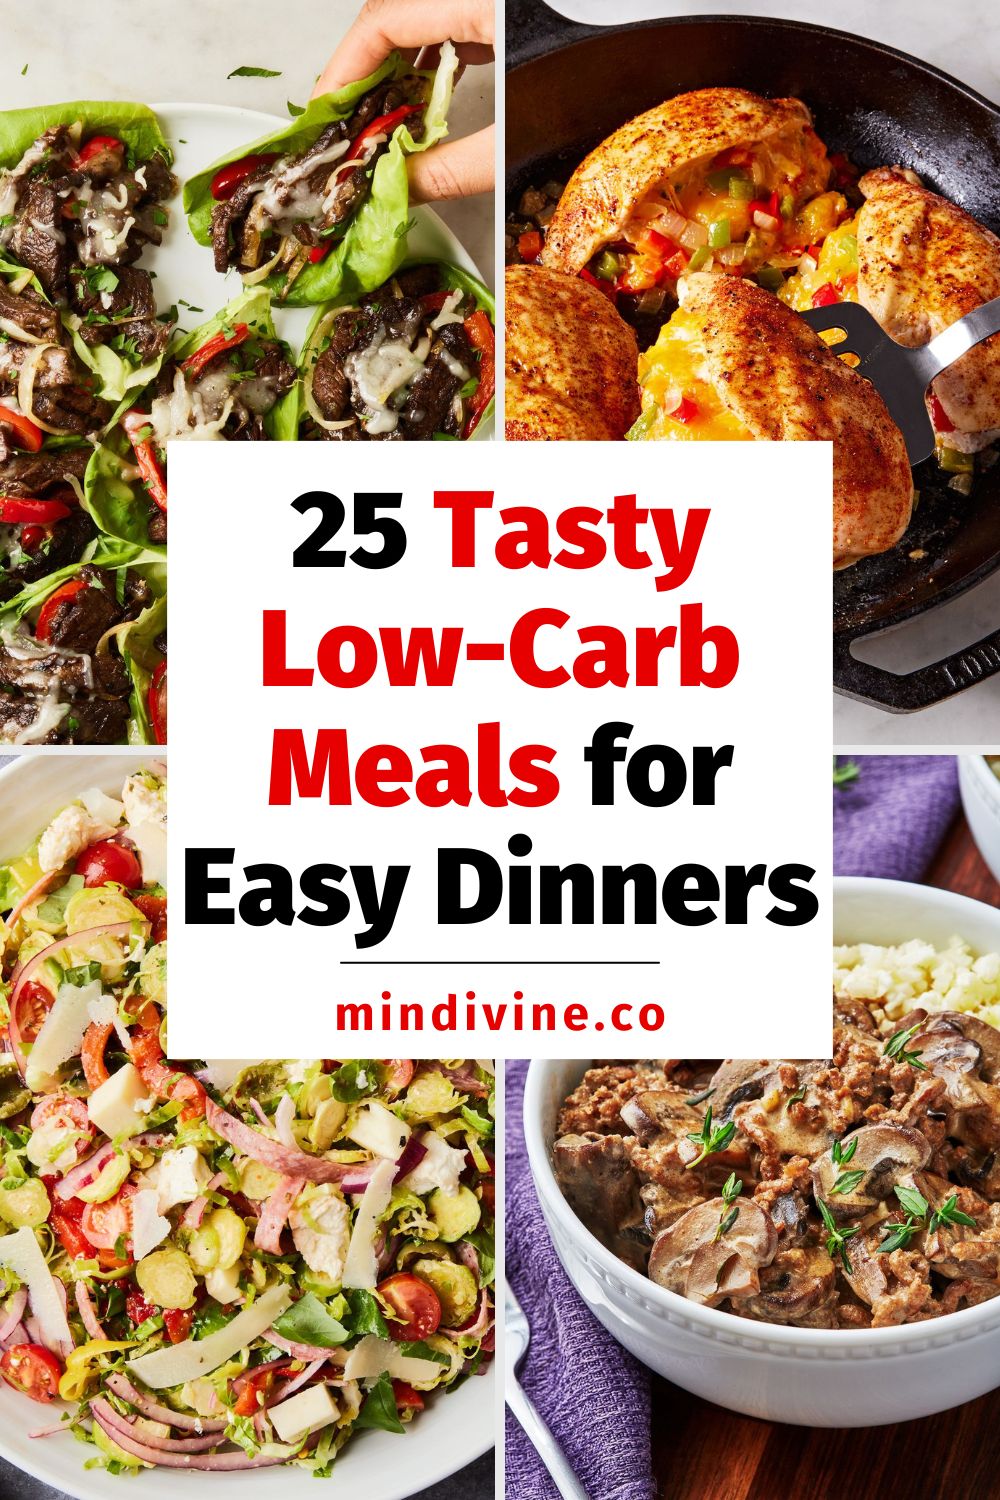 4 delicious low-carbohydrate meals